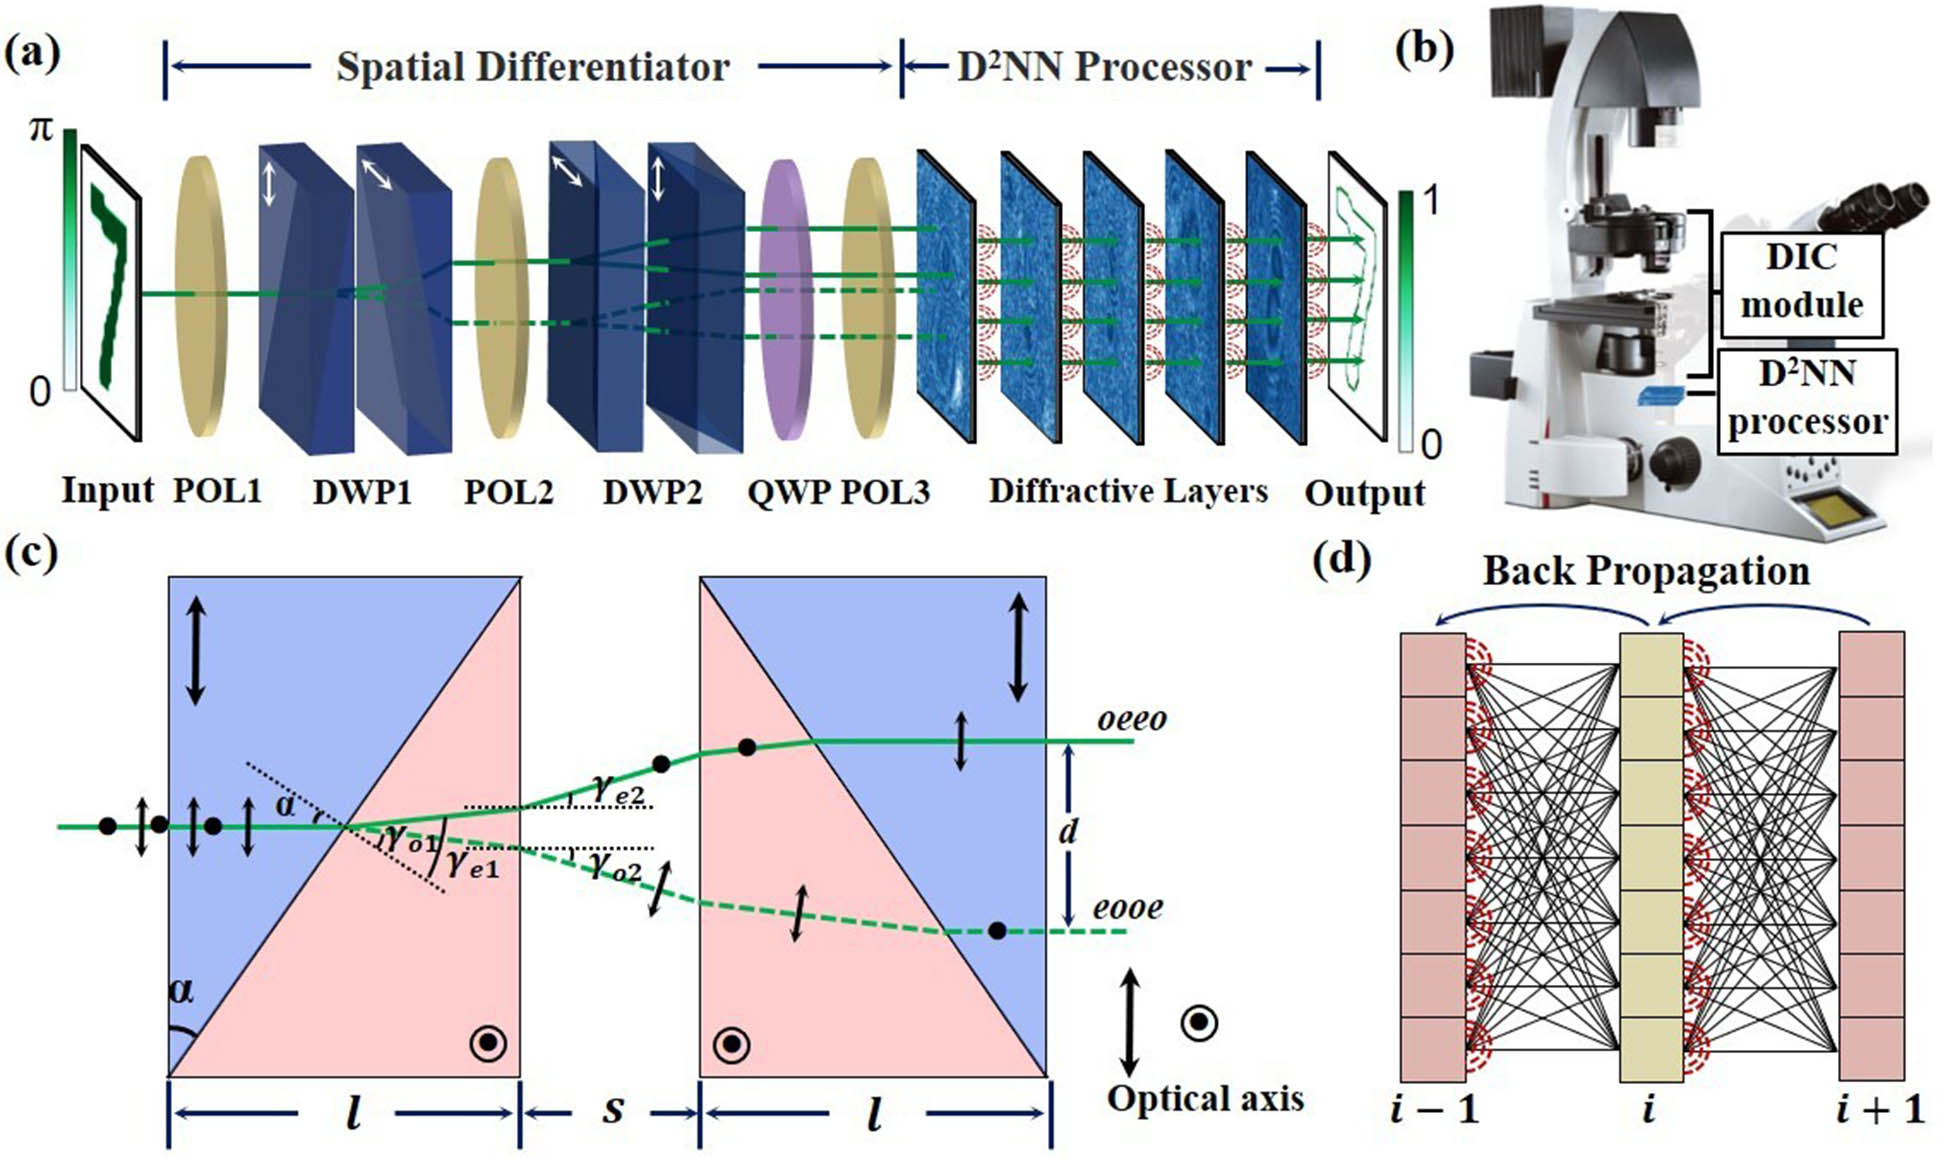 (a) Schematic diagram of DPENet. The DPENet consists of two parts: spatial differentiator and all-optical processor. POL, polarizer; DWPs, dual Wollaston prisms; QWP, quarter-wave plate. (b) Edge detection system based on a DIC microscope. (c) Ray-tracing diagram of DWPs. α, structural angle of prisms; γ, refraction angle. (d) Schematic diagram of forward- and backpropagation of a three-layer D2NN.